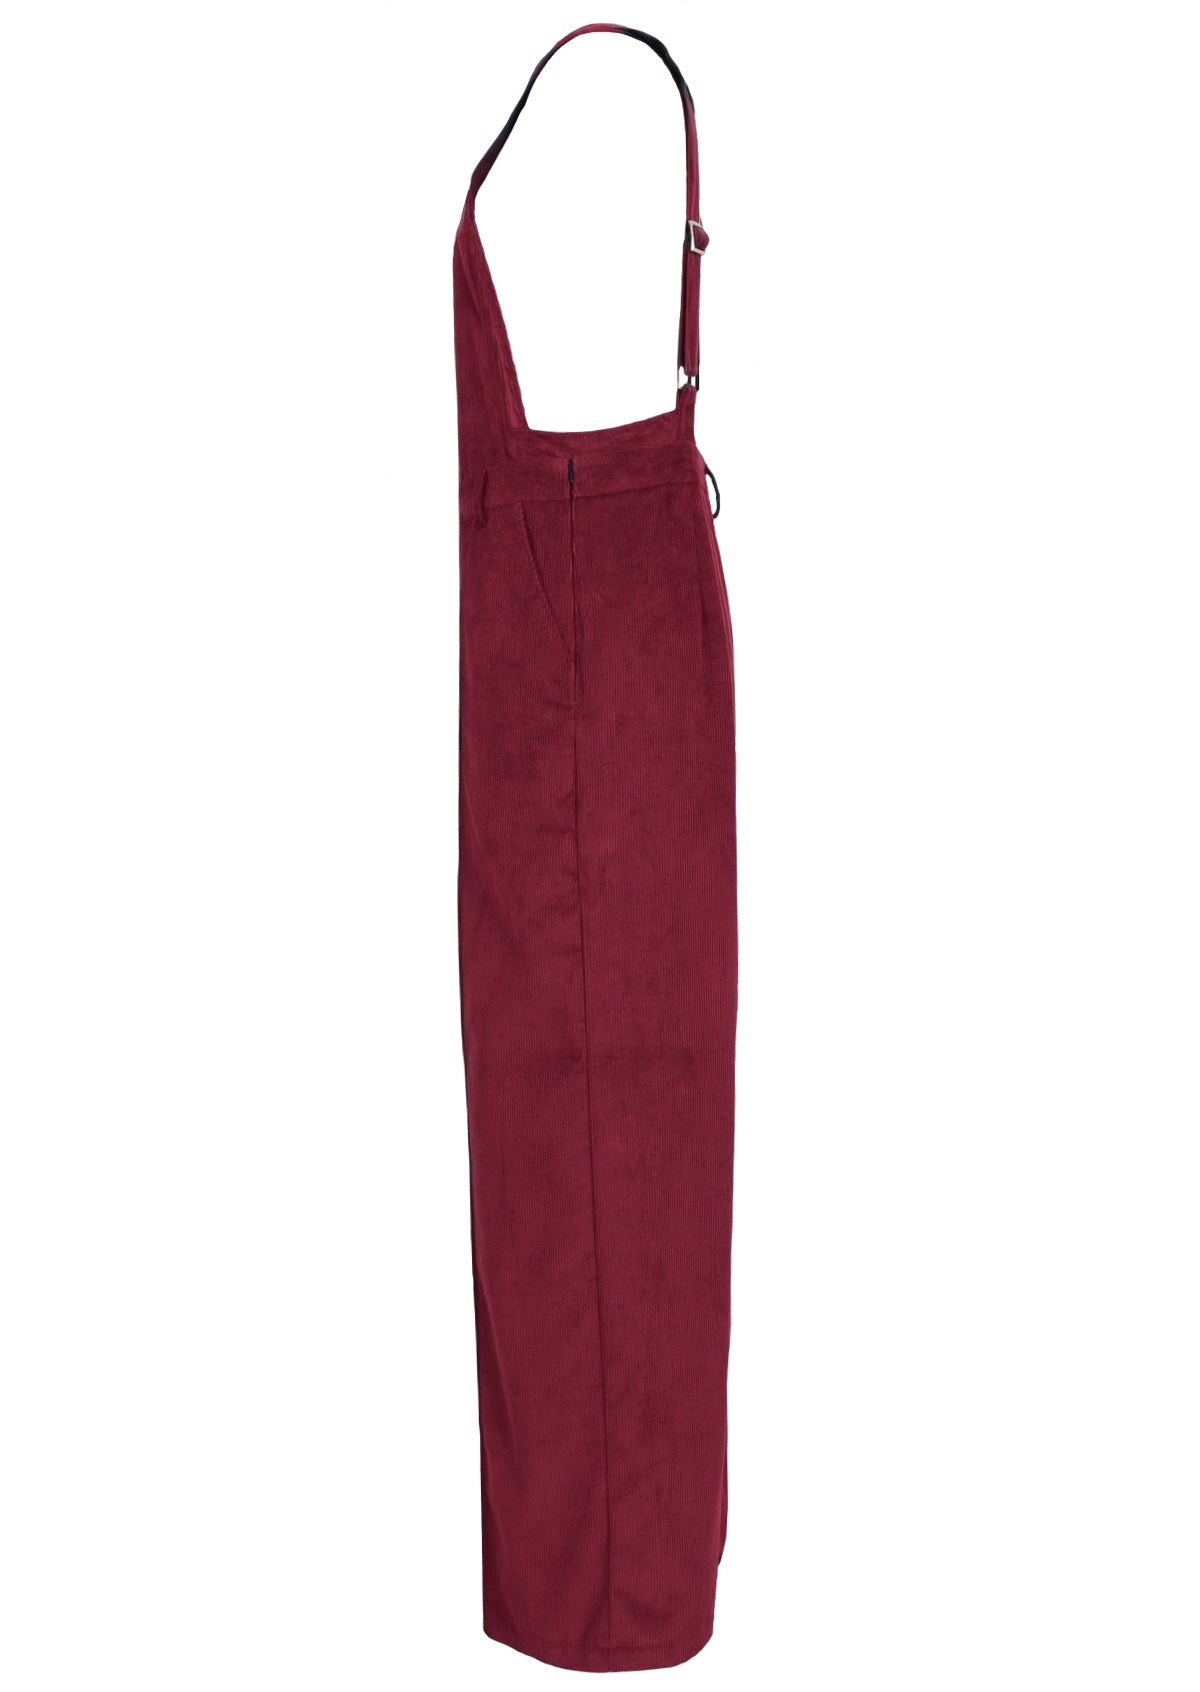 100% cotton corduroy overalls in red has adjustable straps for a perfect fit. 